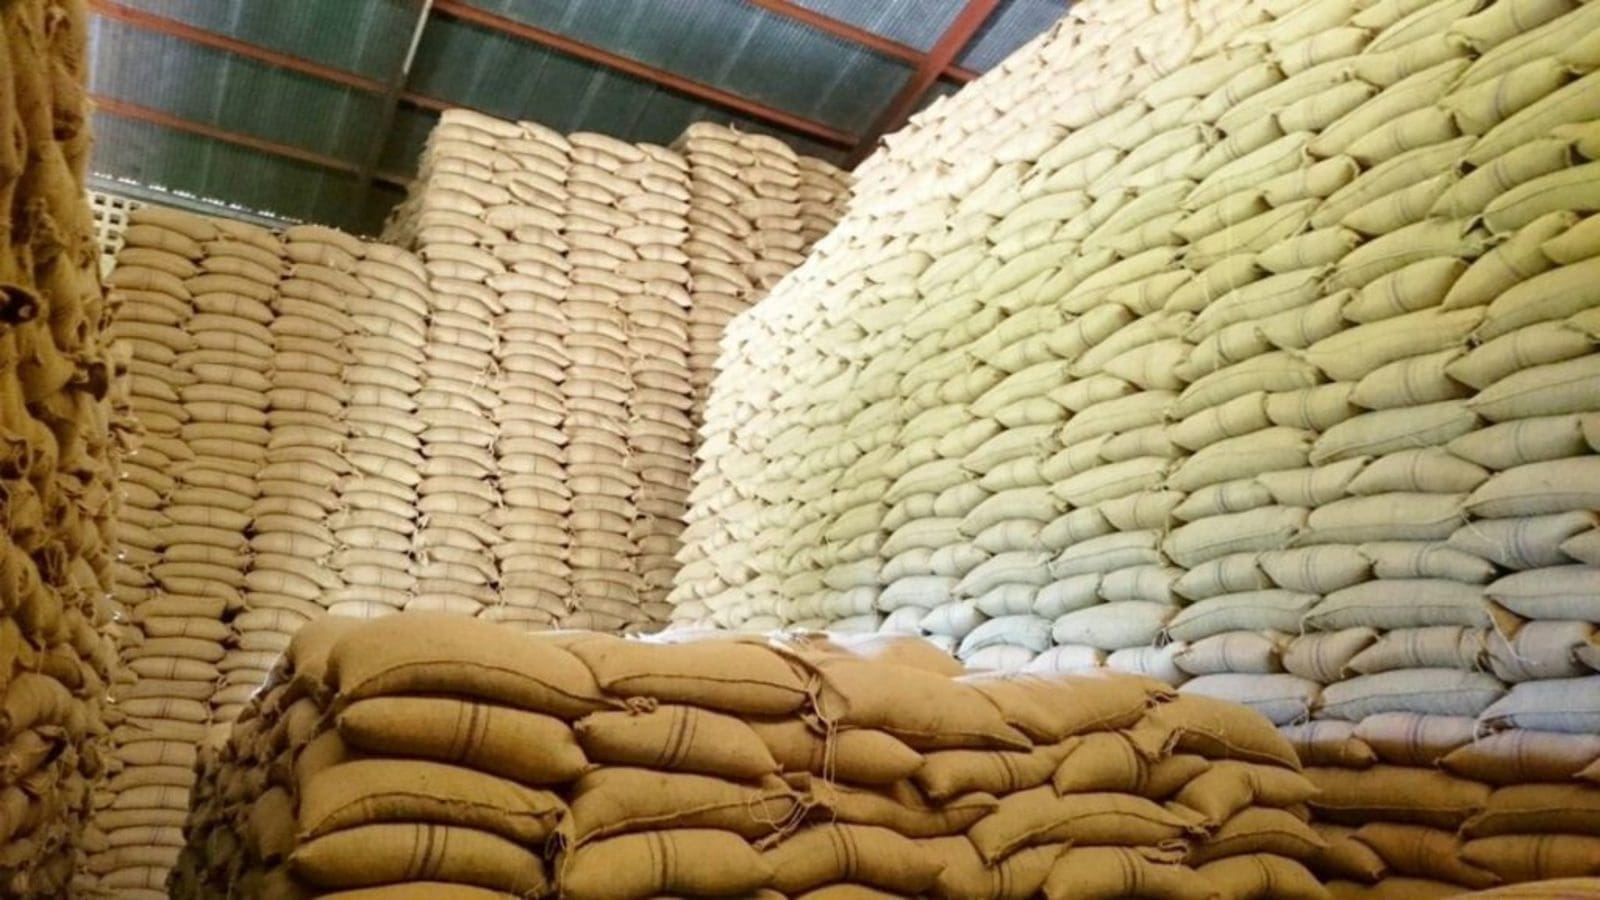 Kenya’s maize supply in jeopardy as traditional trade partners find lucrative markets elsewhere